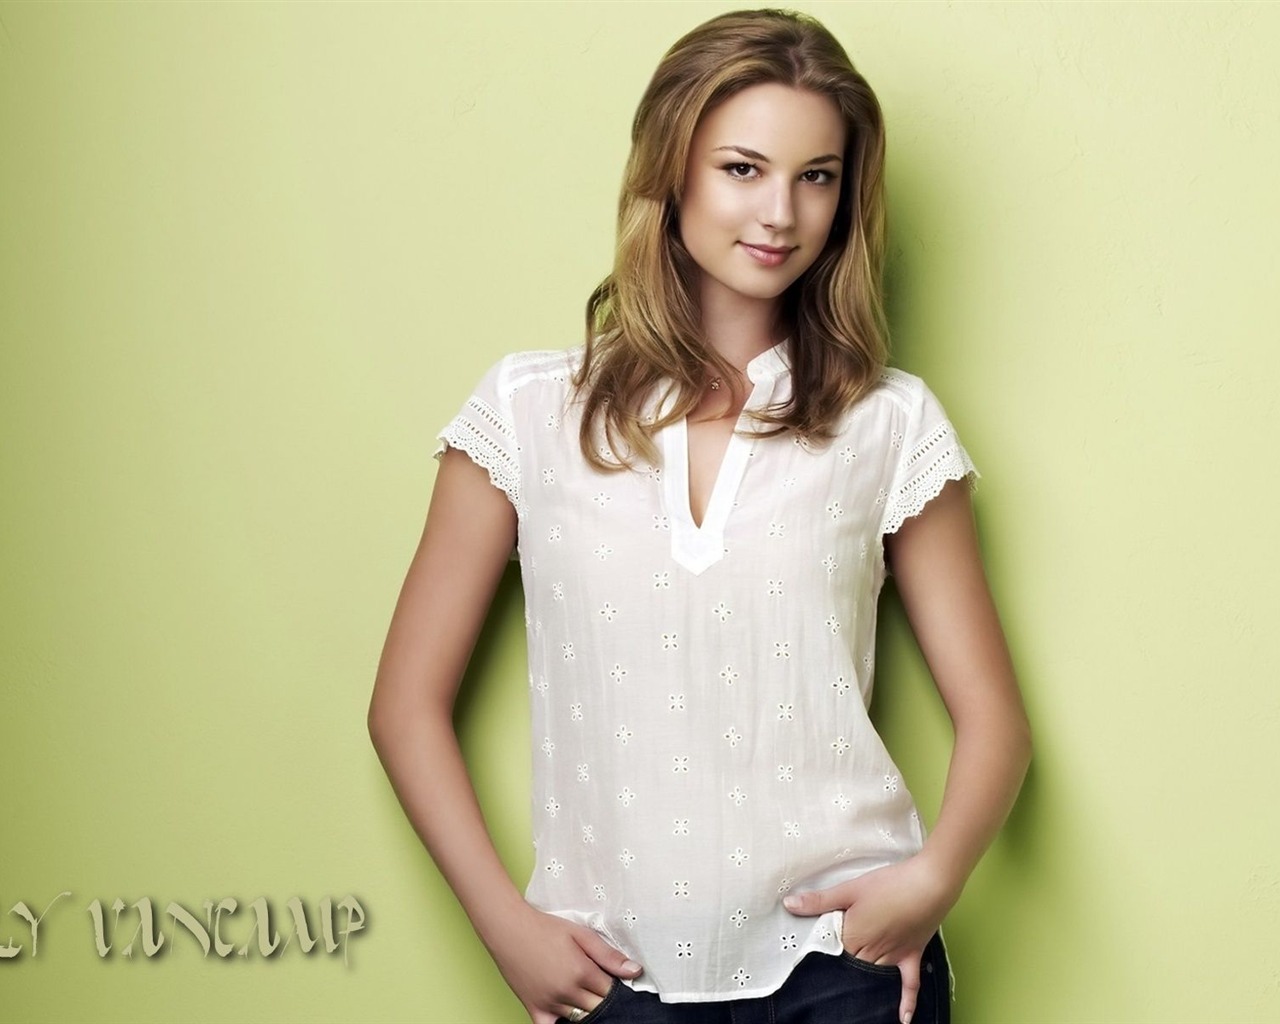 Emily VanCamp #003 - 1280x1024 Wallpapers Pictures Photos Images